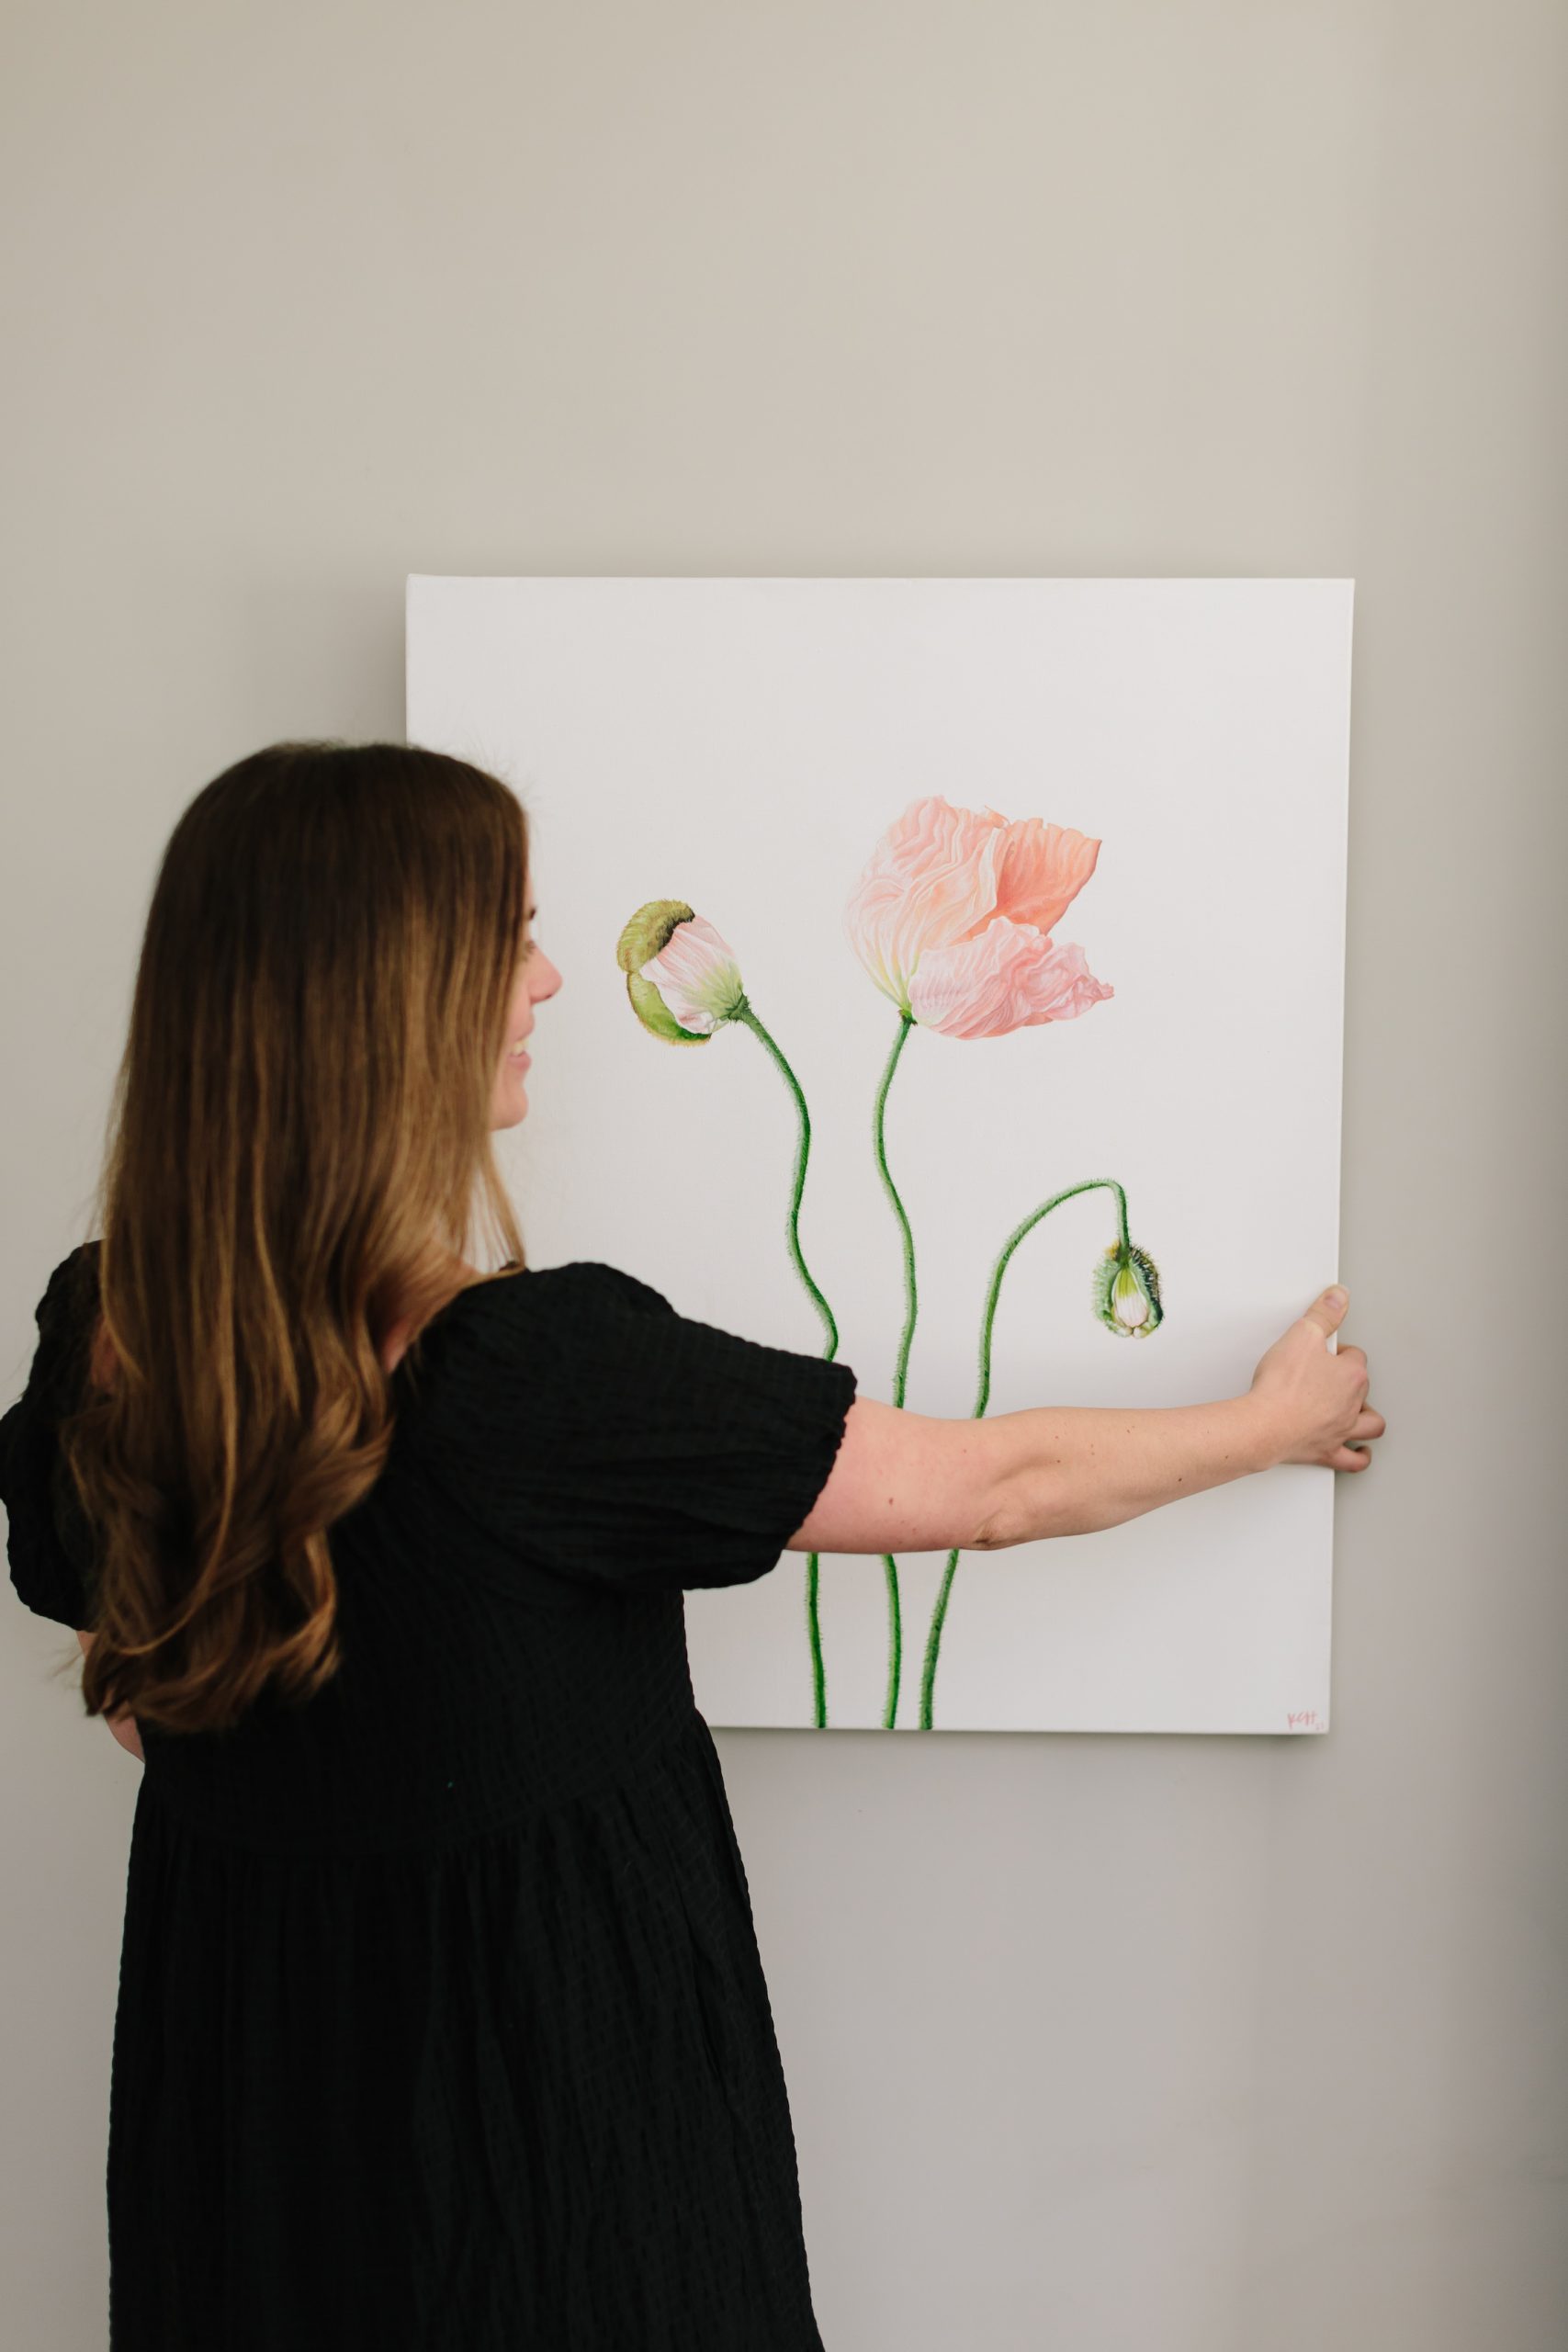 Kenan Hill hanging an original acrylic painting of pink poppies from 3 Porch Farm